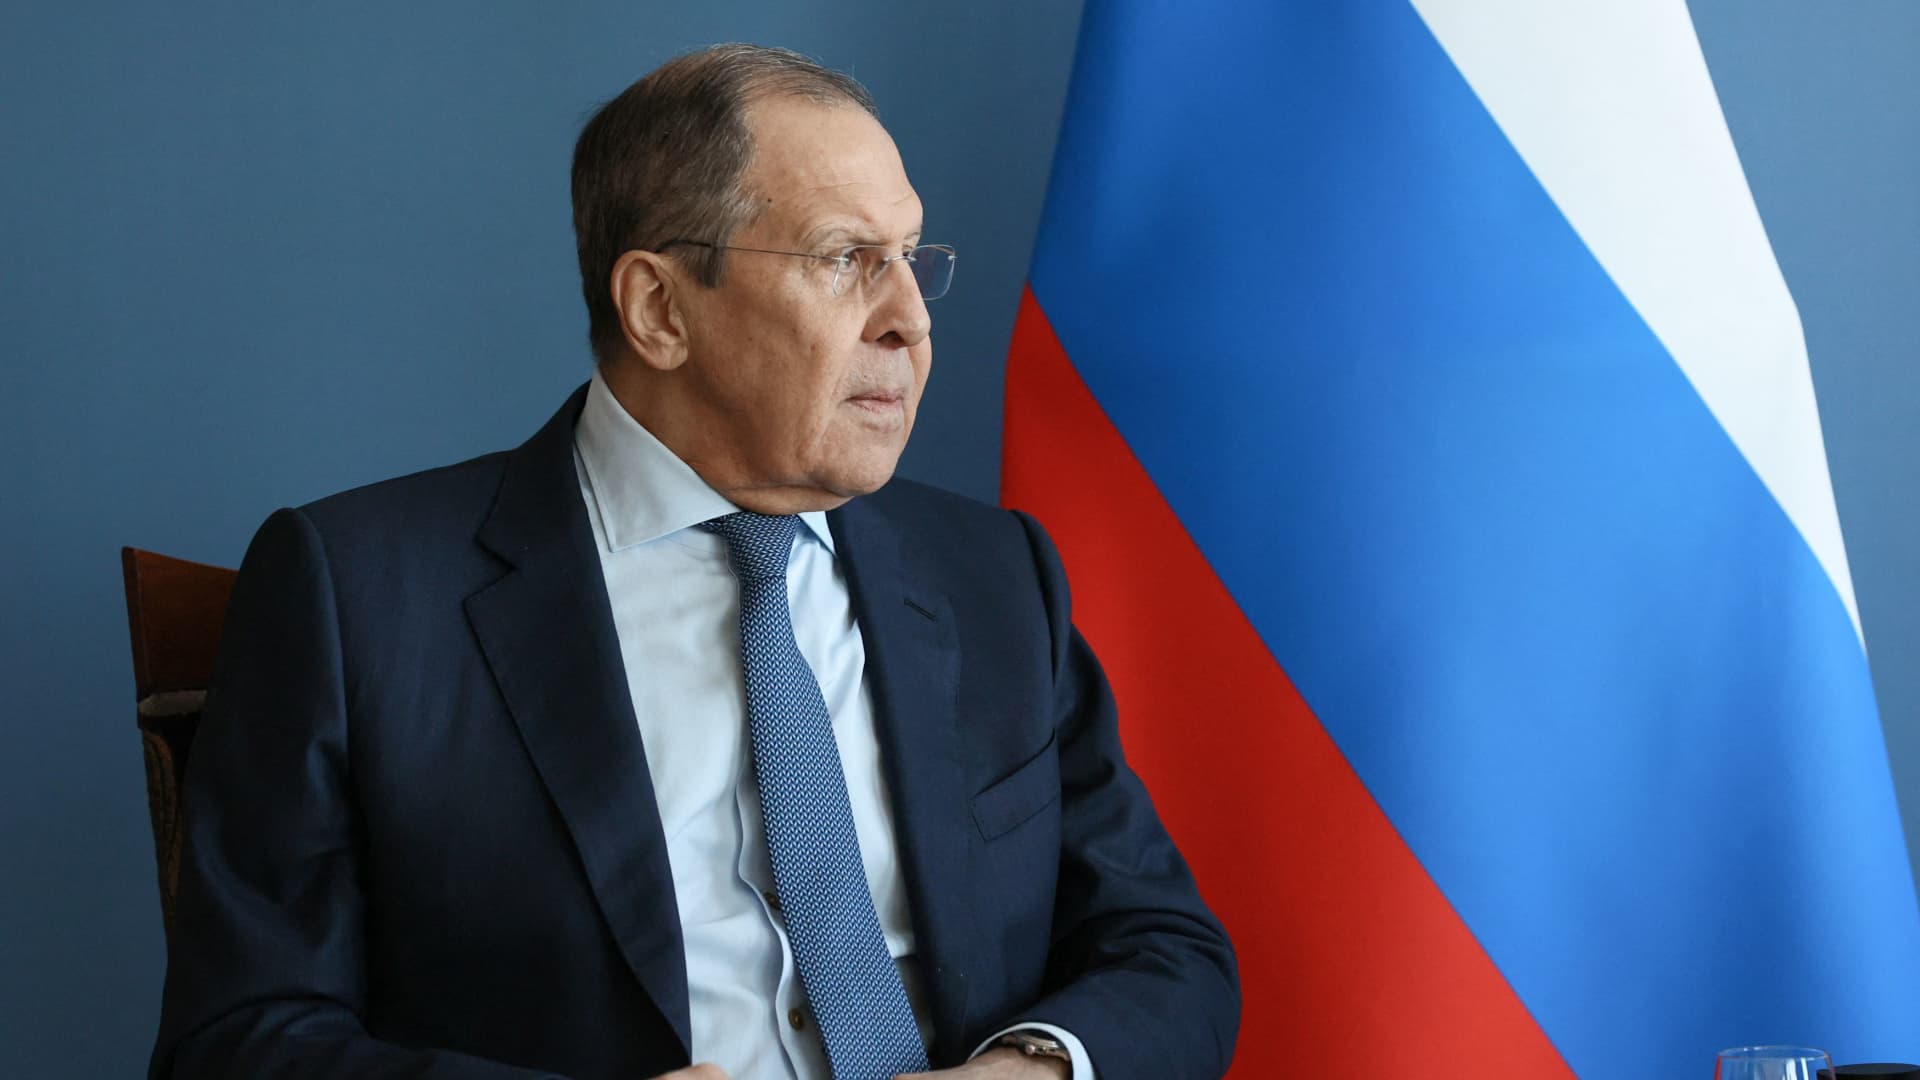 Russian Foreign Minister Sergei Lavrov attends a meeting with Switzerland's President and head of the Federal Department of Foreign Affairs Ignazio Cassis, on the sidelines of the U.S.-Russia summit in Geneva, Switzerland January 21, 2022.